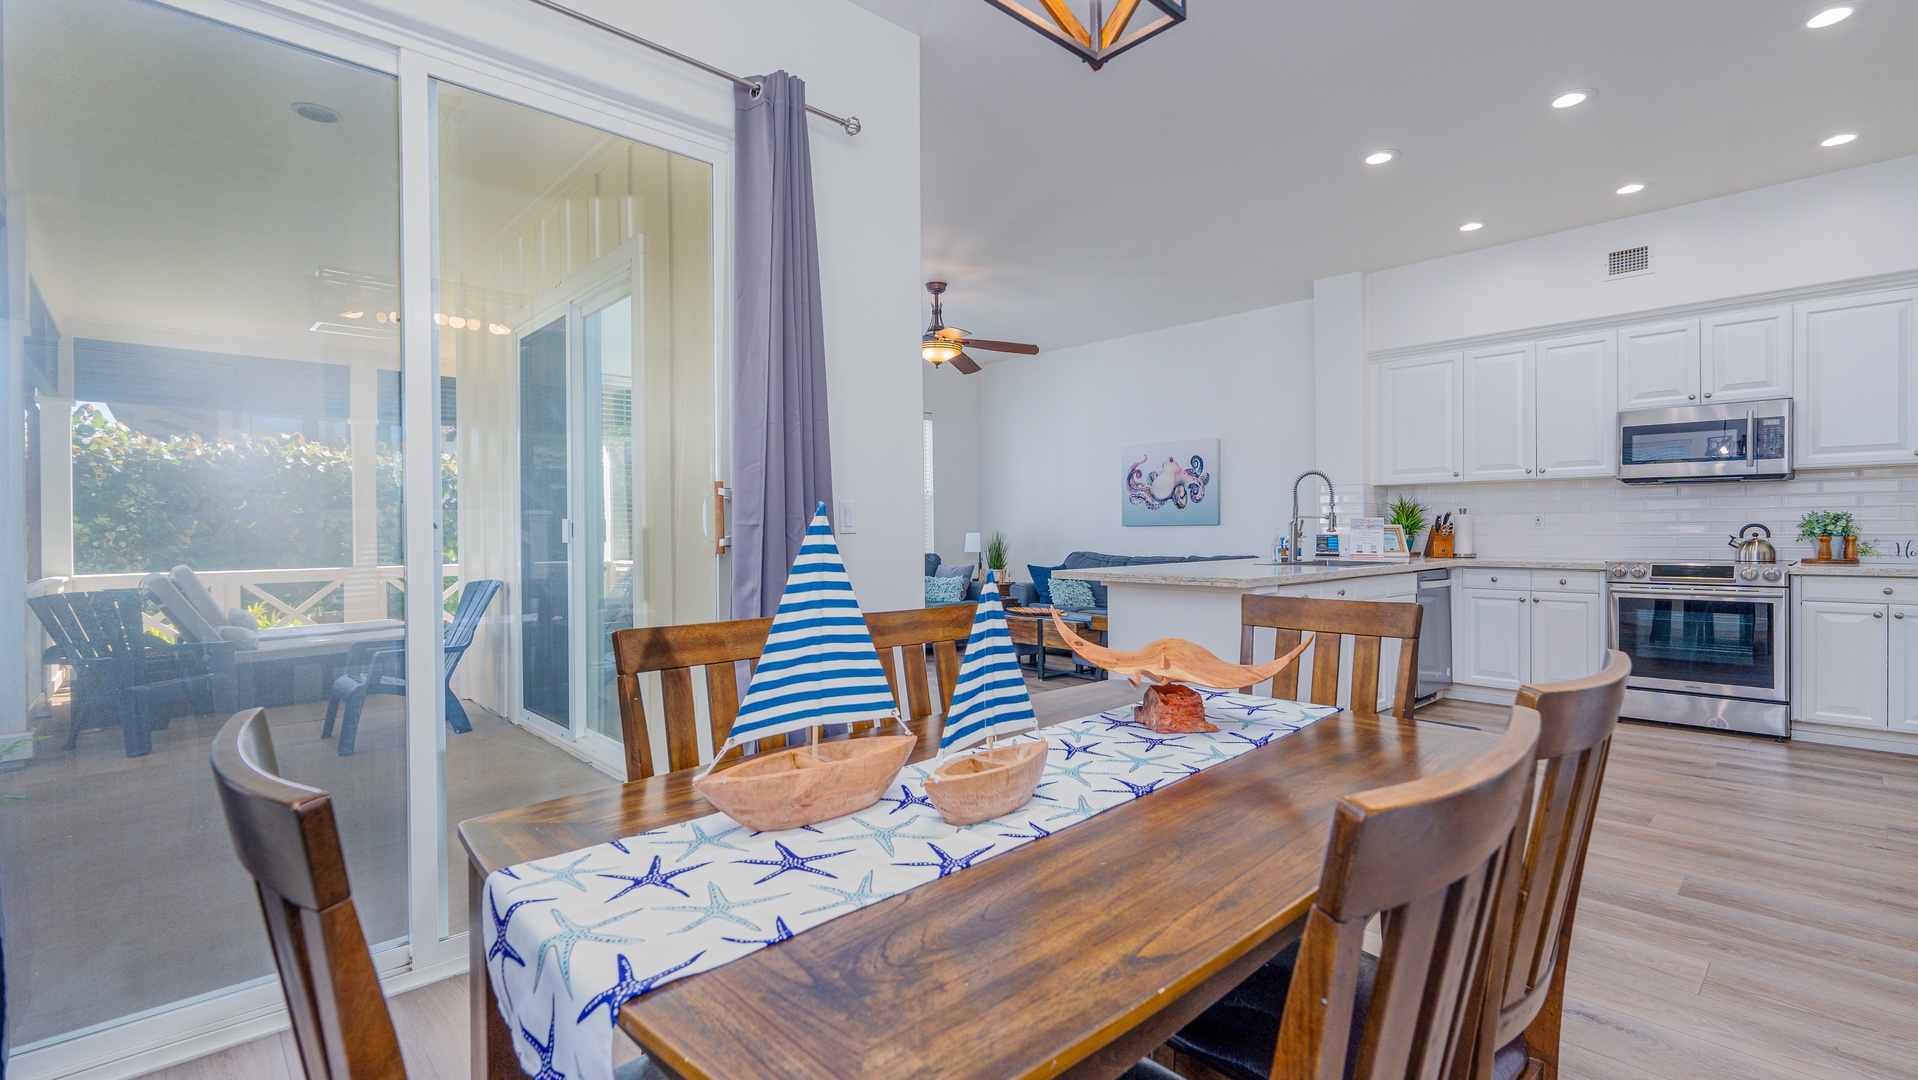 Kapolei Vacation Rentals, Coconut Plantation 1078-1 - The dining area offers a rustic table for six.